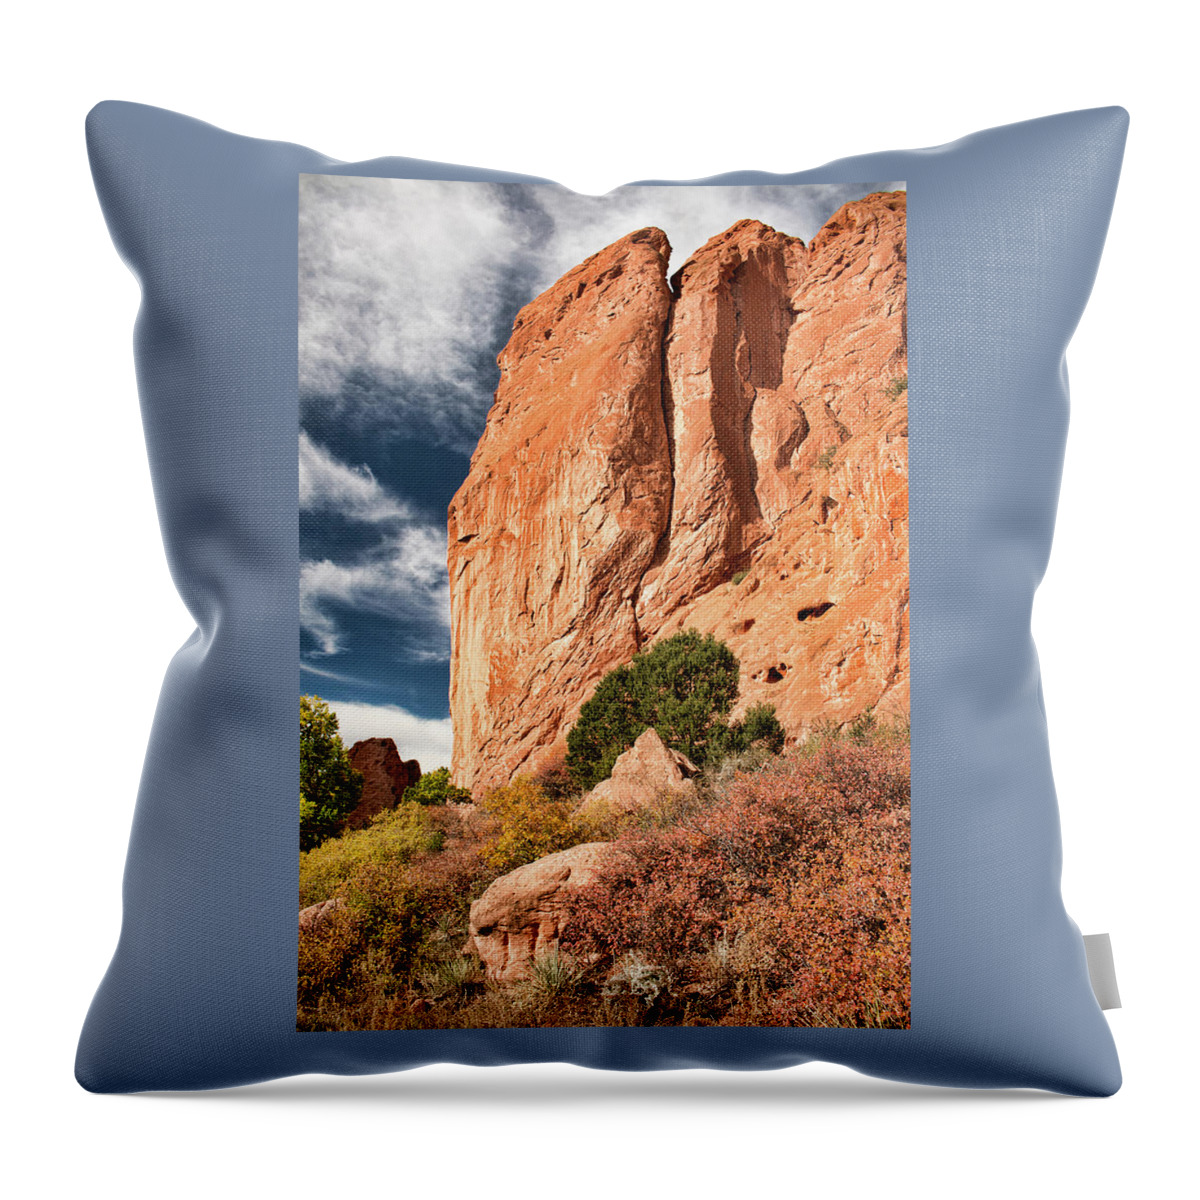 Garden Of The Gods Throw Pillow featuring the photograph North Gateway Rock - Garden of The Gods by Kristia Adams